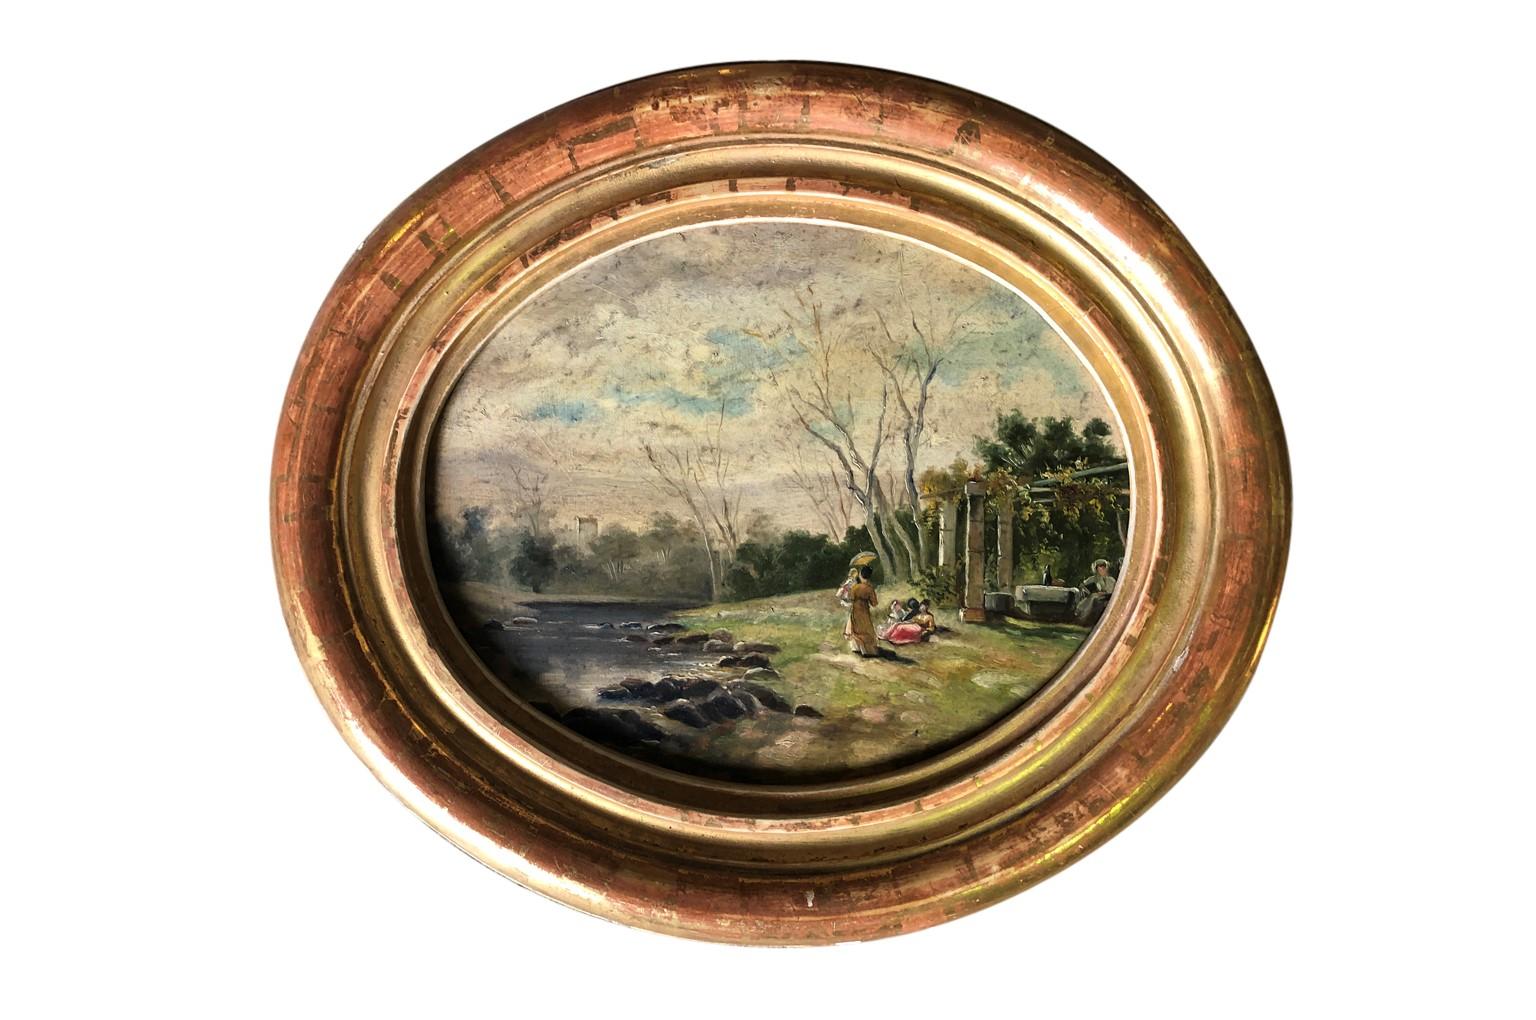 A charming set of 4 oval shaped 19th century oil on board paintings of the Majorcan countryside housed in their handsome giltwood frames. A very lovely collection.